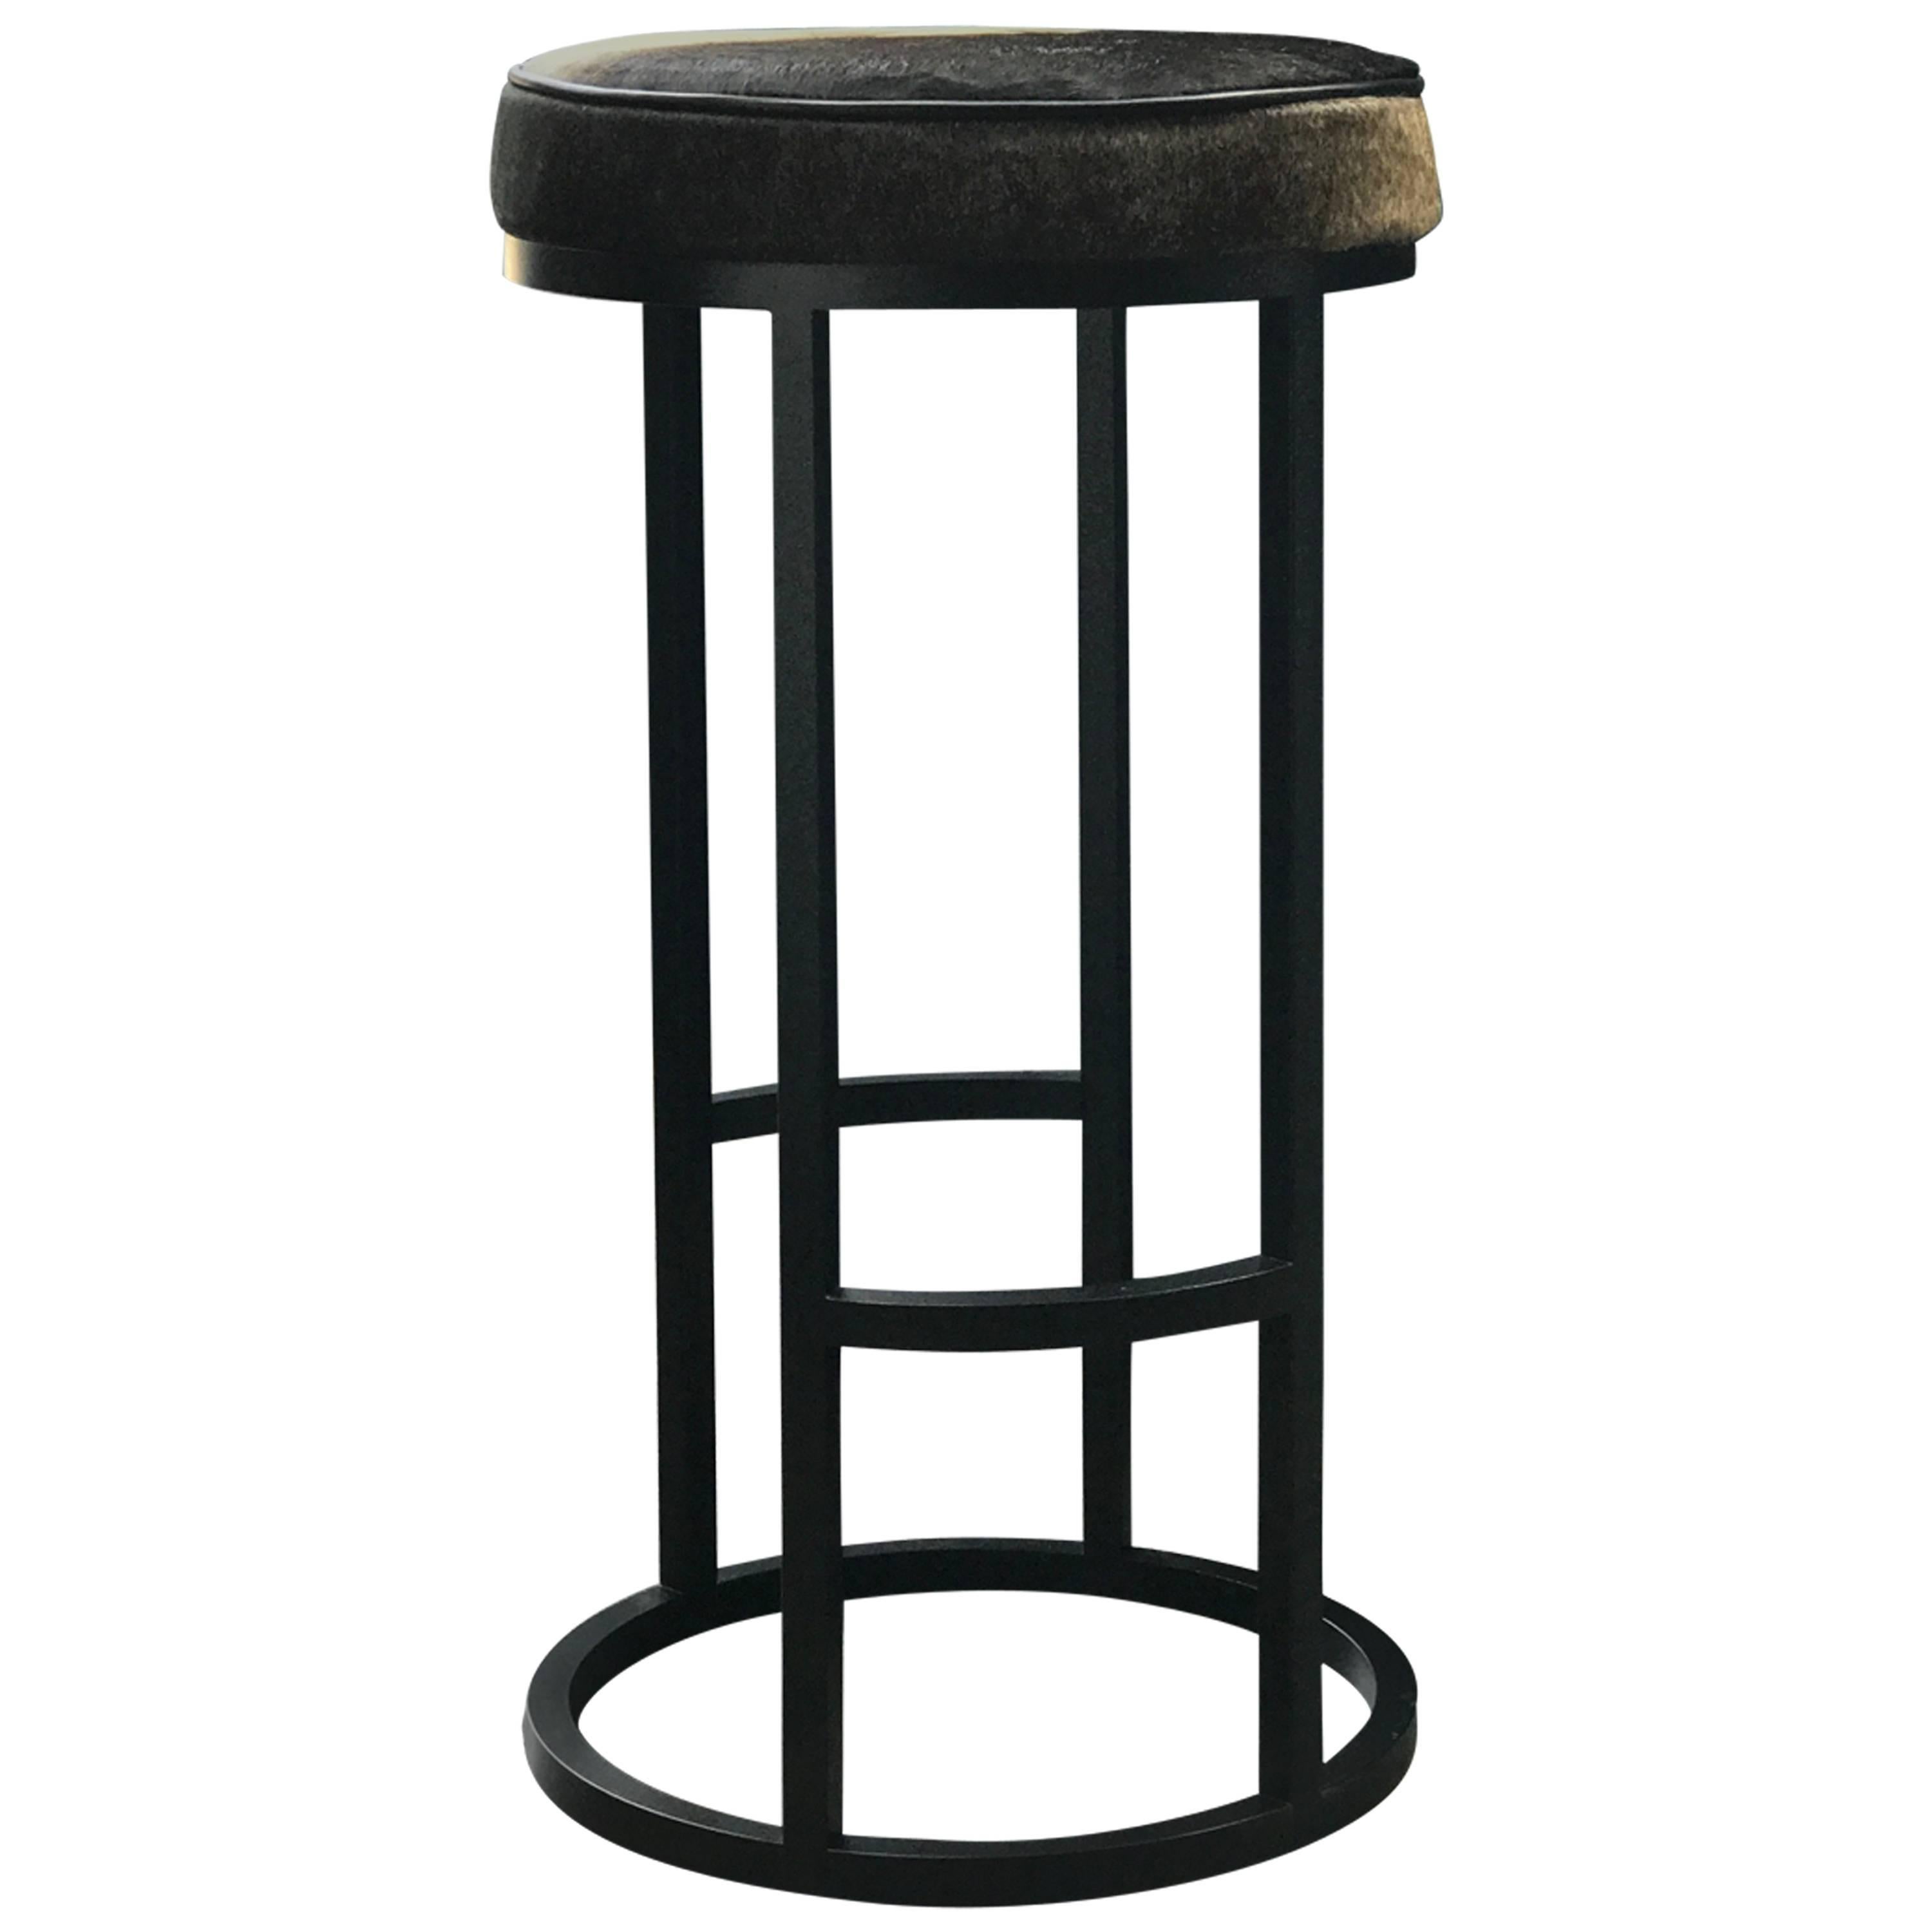 Diana Bar Stool Circular in Steel Powder-Coated and Leather For Sale